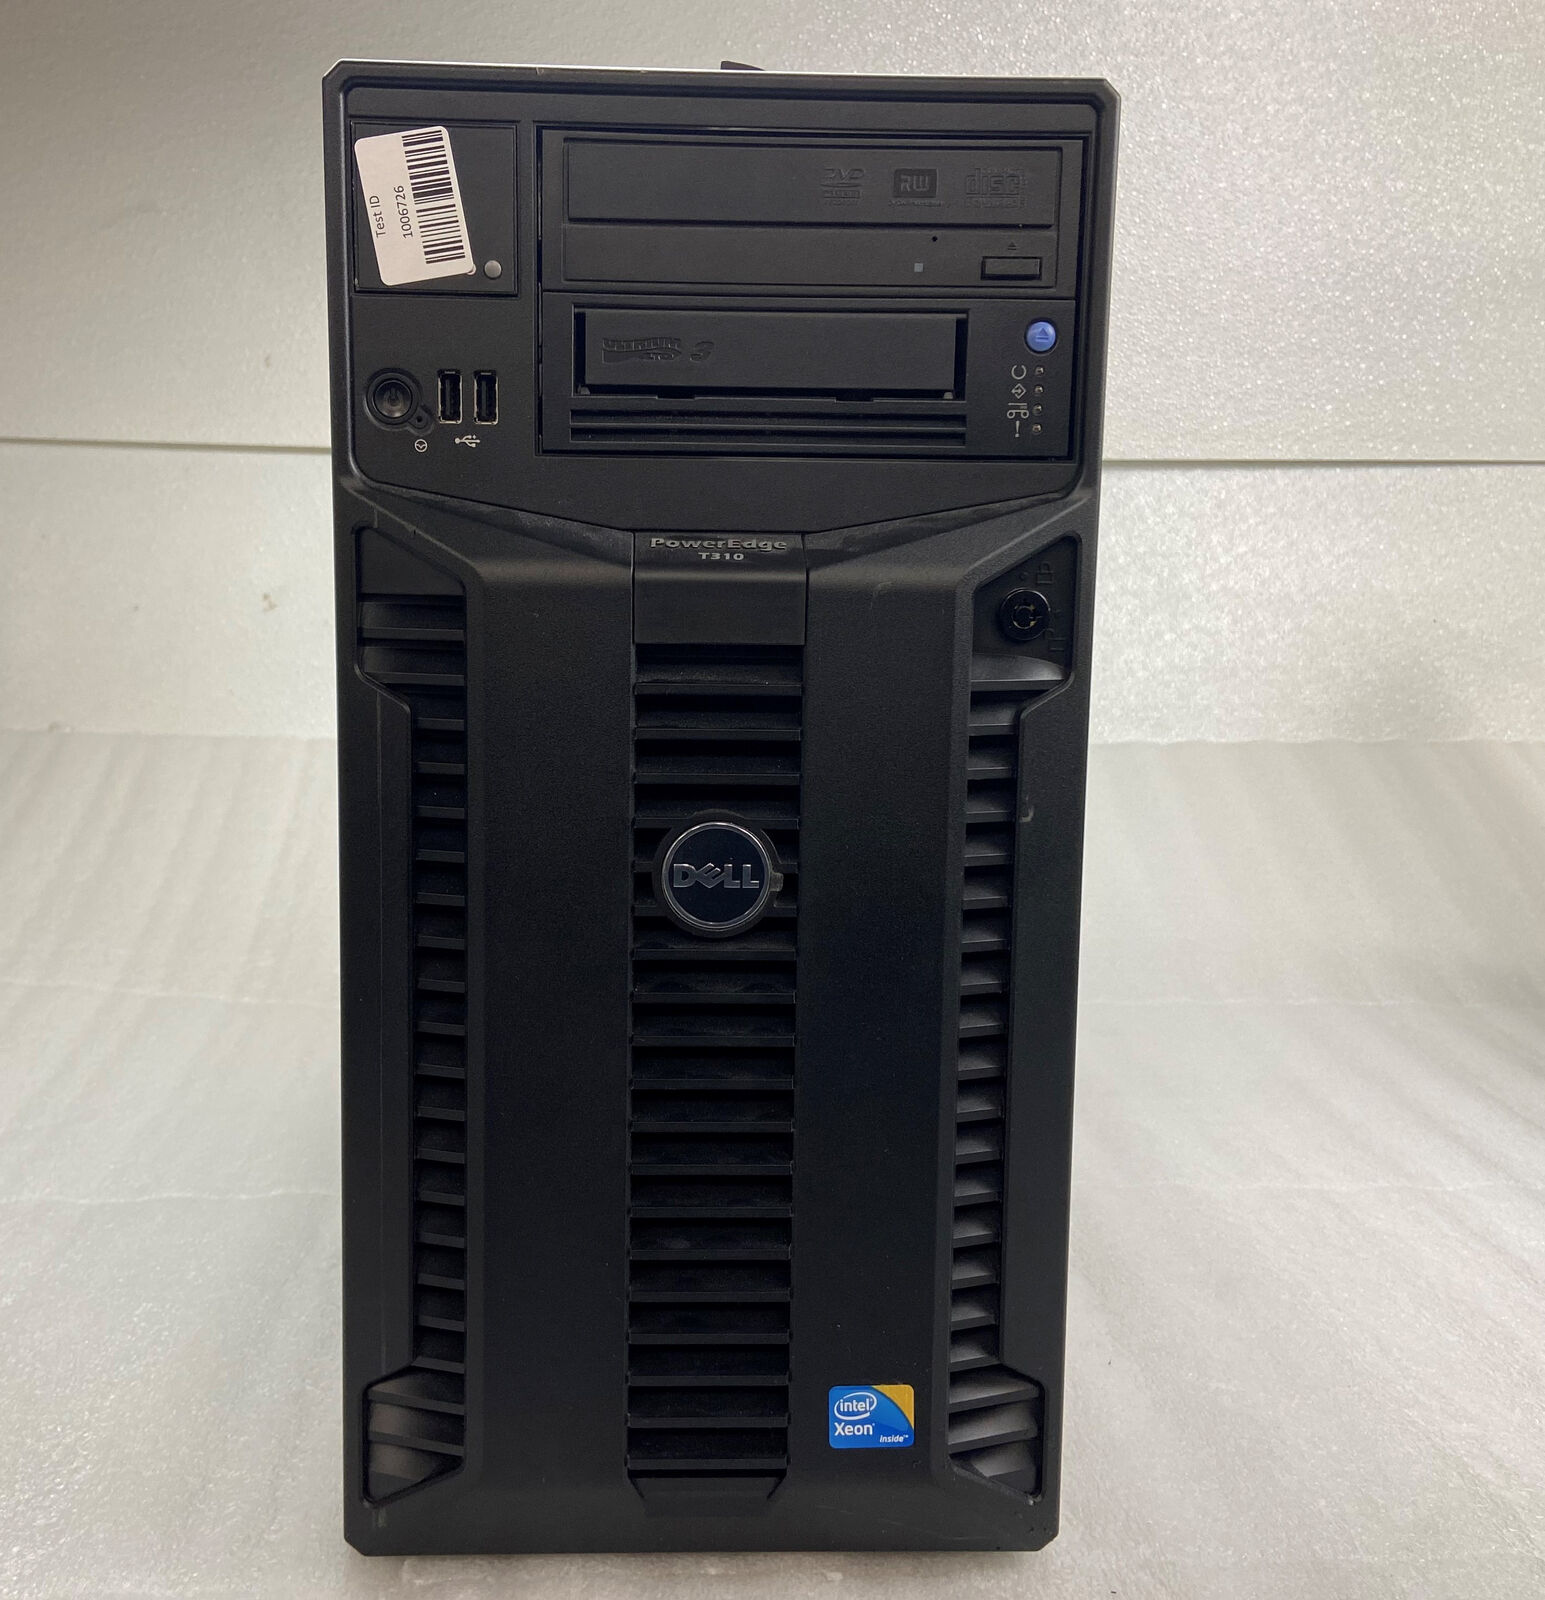 Dell PowerEdge T310 Server BOOTS Intel Xeon X3430 @2.4GHz 4GB RAM NO HDD NO OS